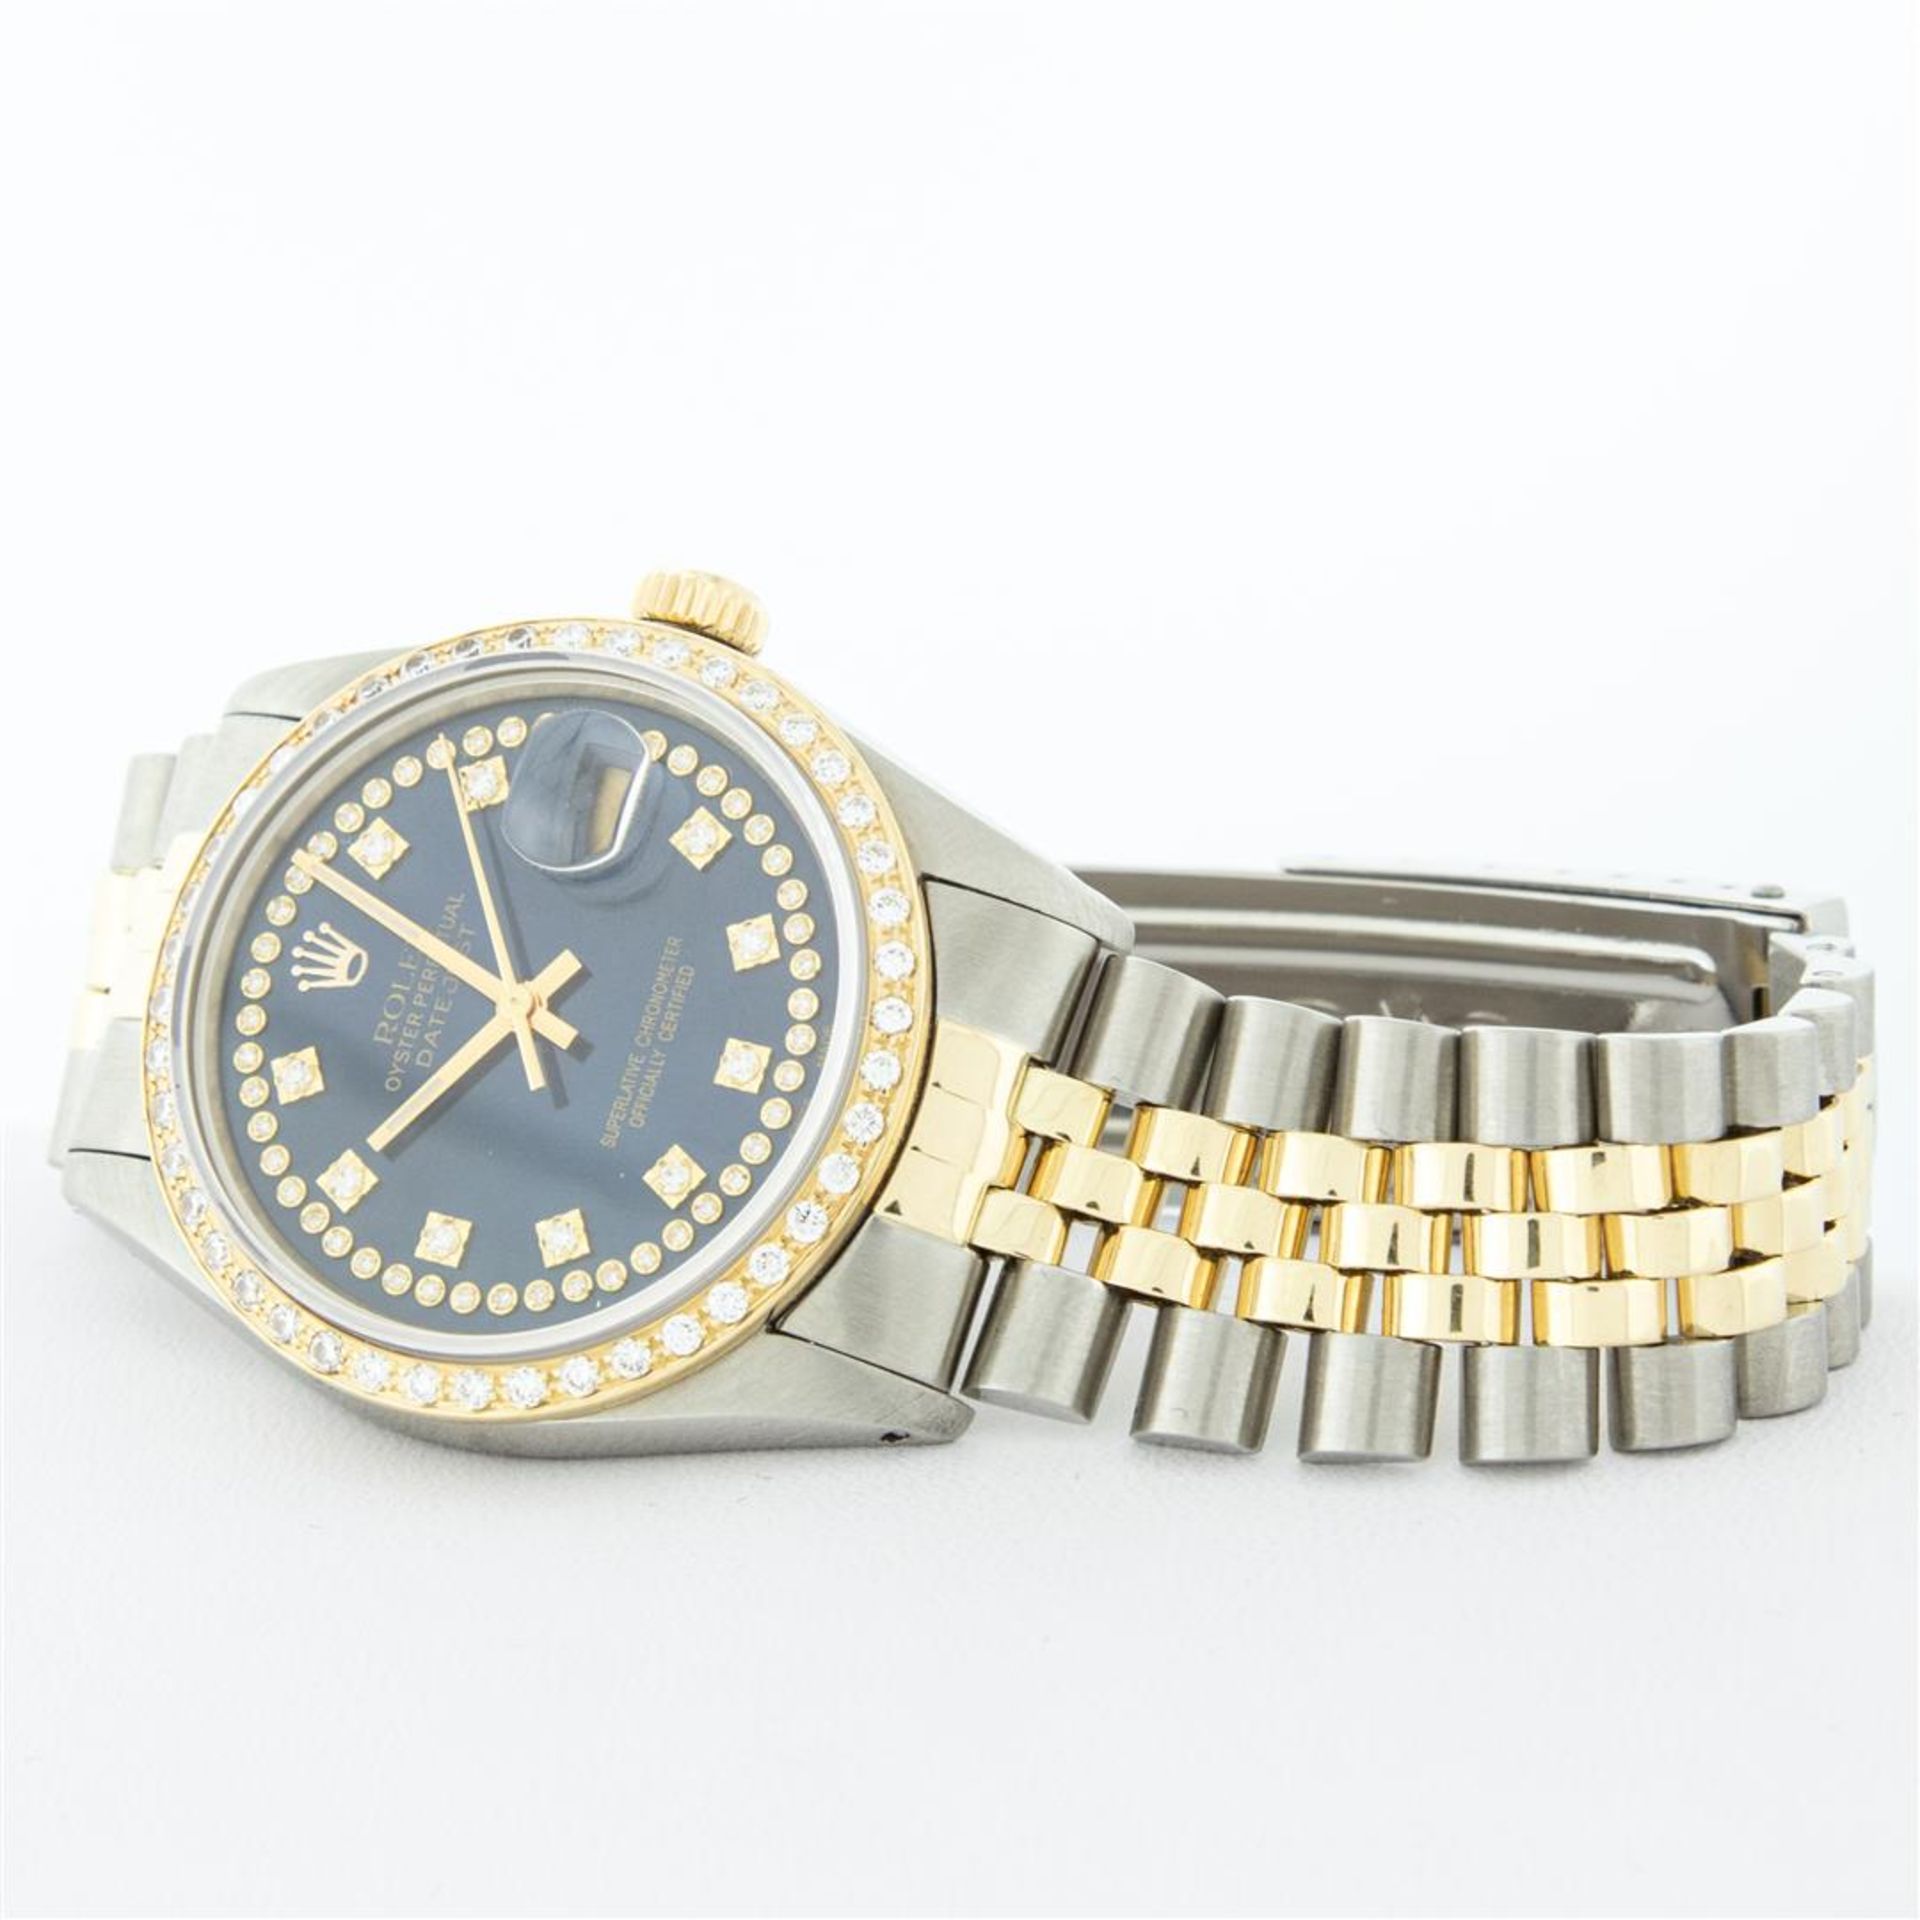 Rolex Mens 2 Tone Blue String VS Diamond Datejust Wristwatch Oyster Perpetual - Image 5 of 9